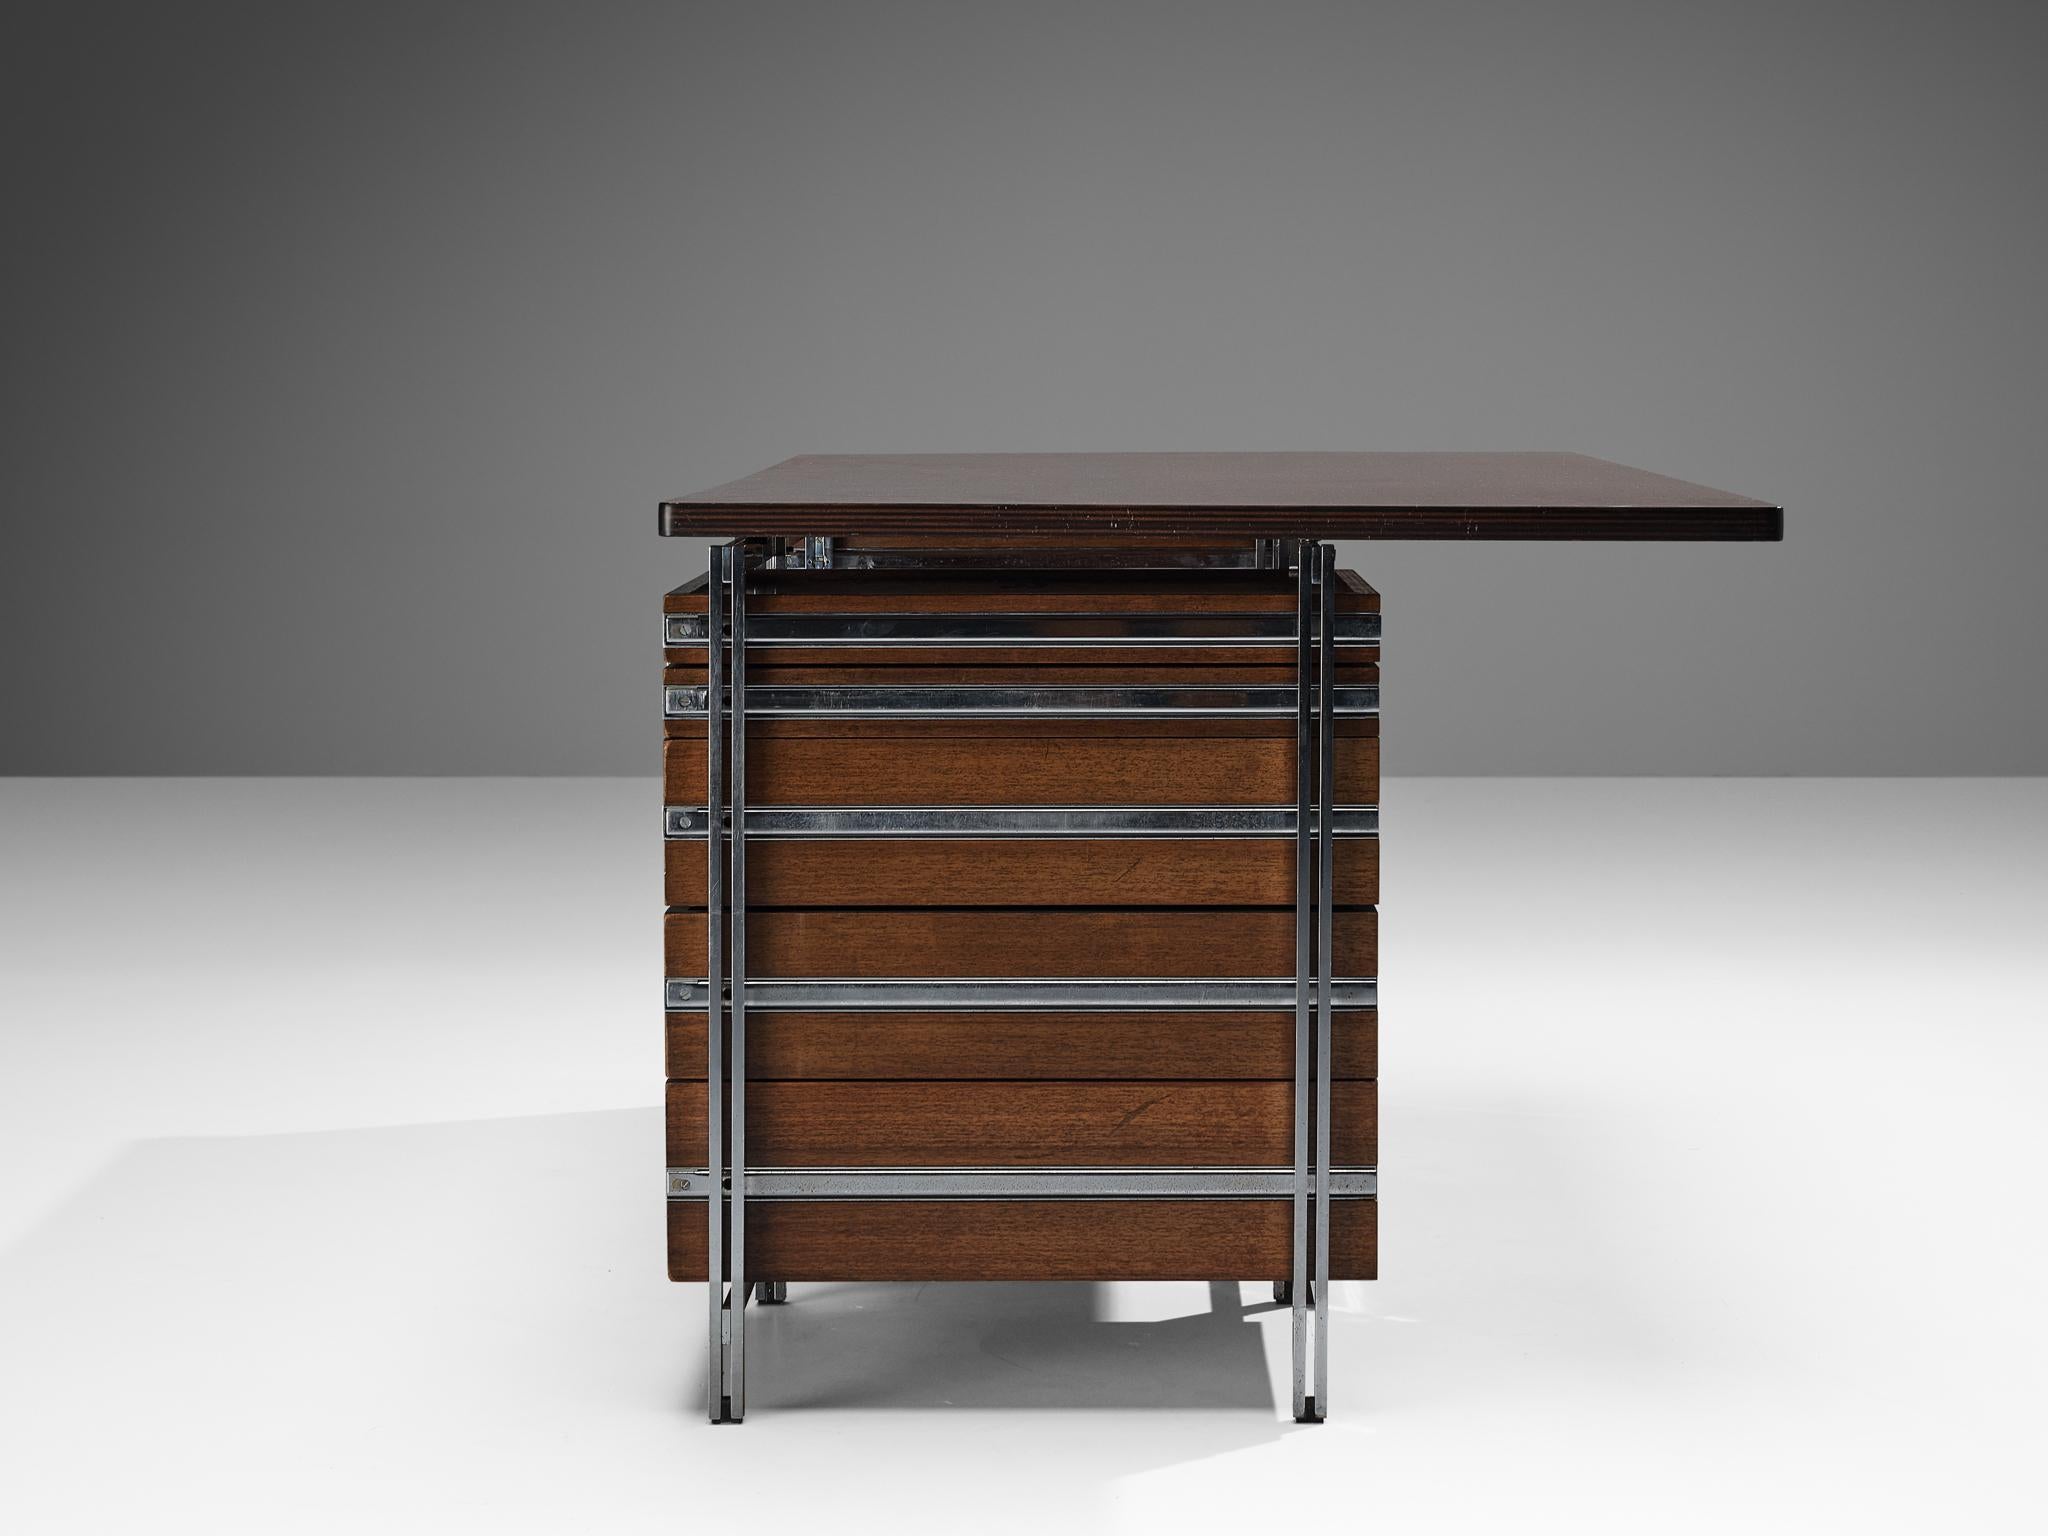 Wood Jules Wabbes for Mobilier Universel Executive Desk in Mutenyé